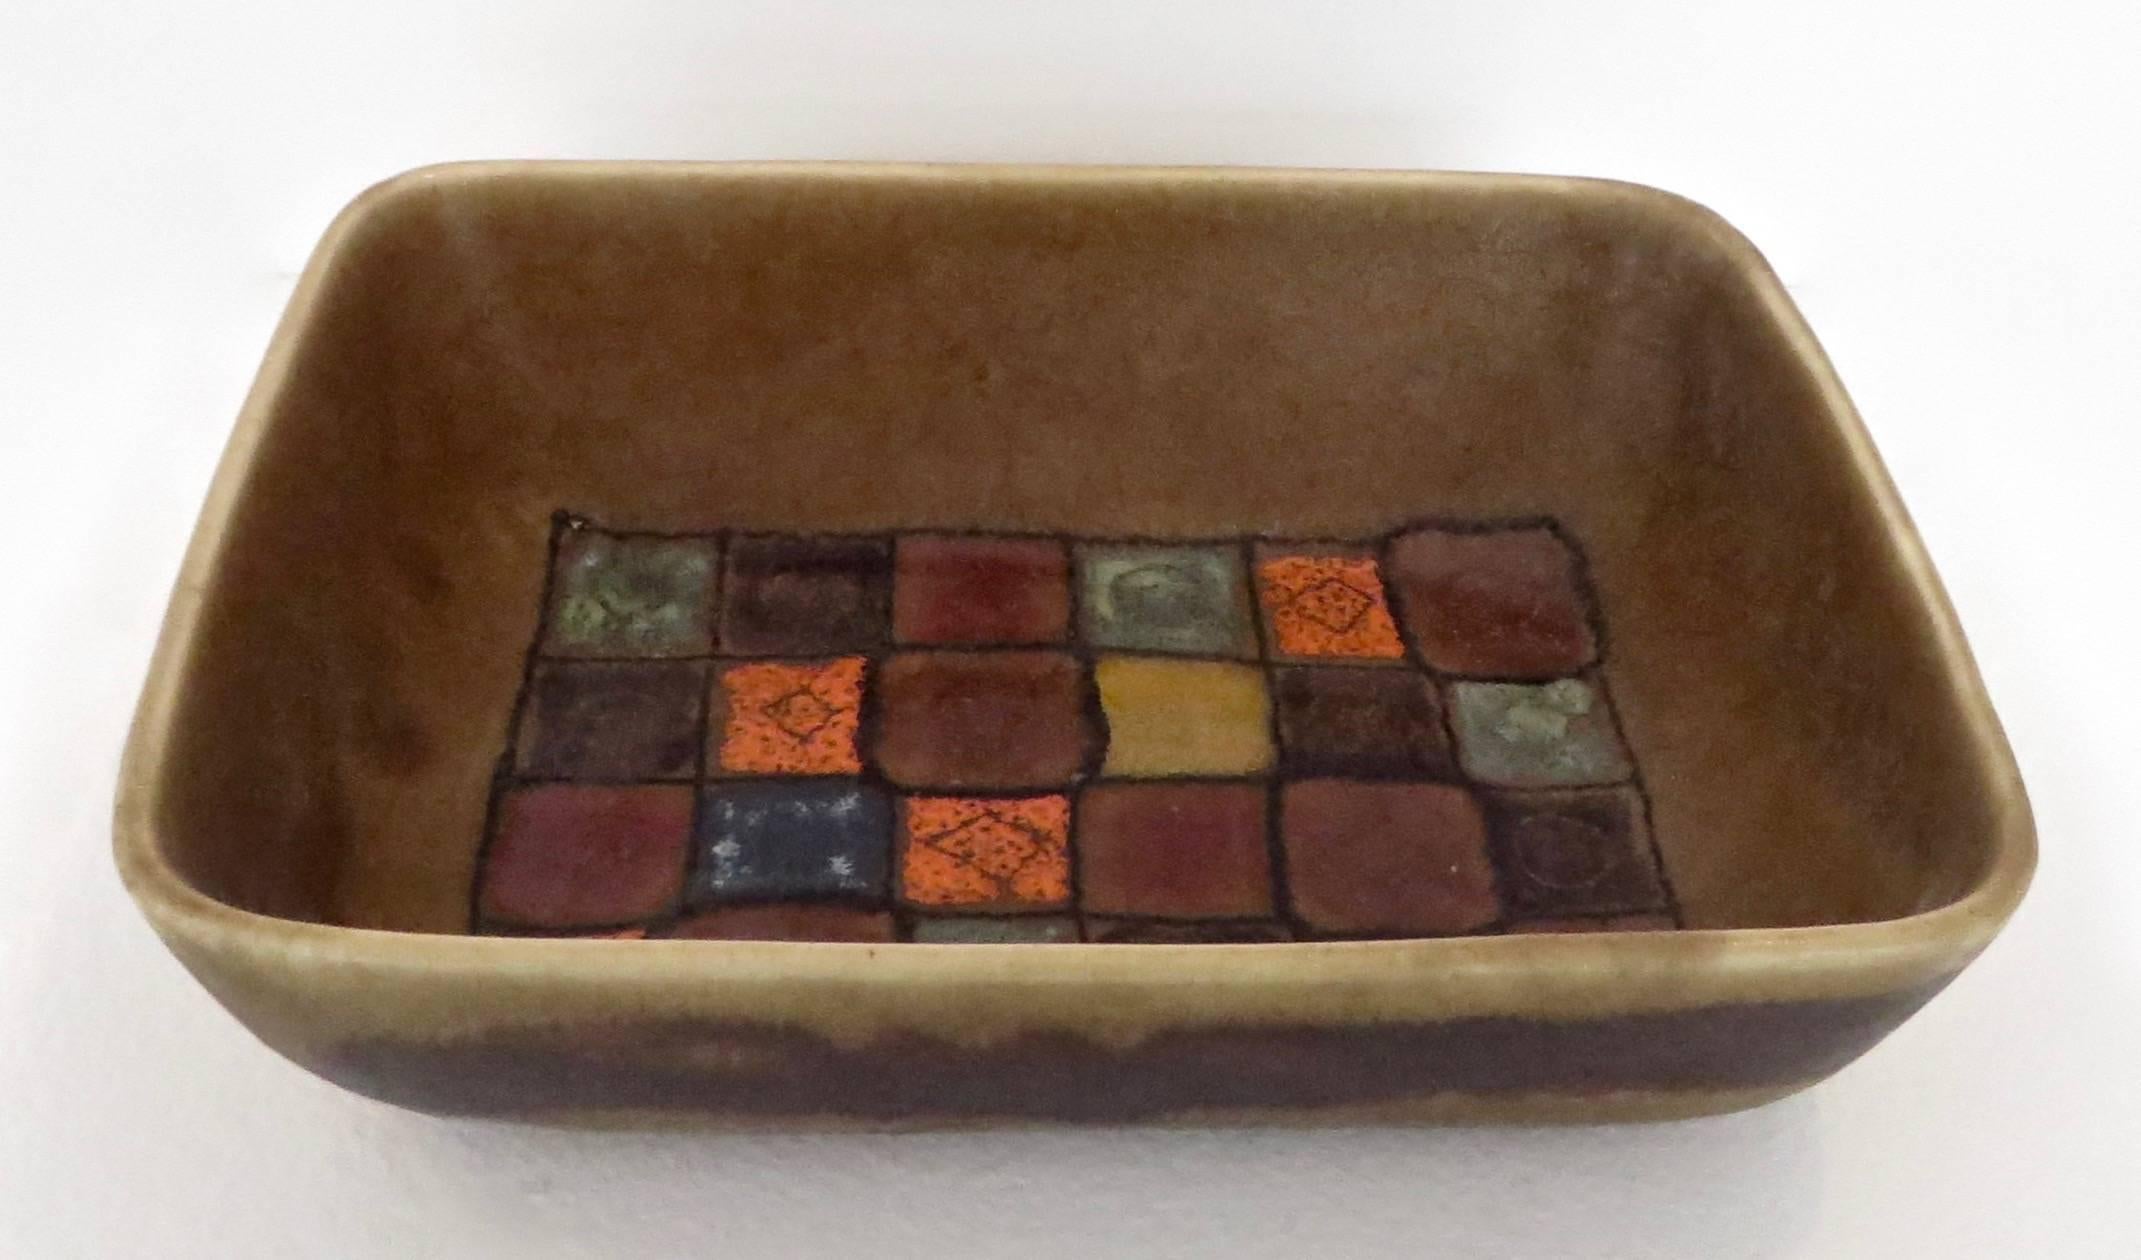 Very unusual Guido Gambone polychrome rectangular ceramic Italian dish. An interesting and vibrant palette of colors in ochre background and detailed interior. The exterior color is ochre and dripping to brown glaze. No chips or restorations, circa